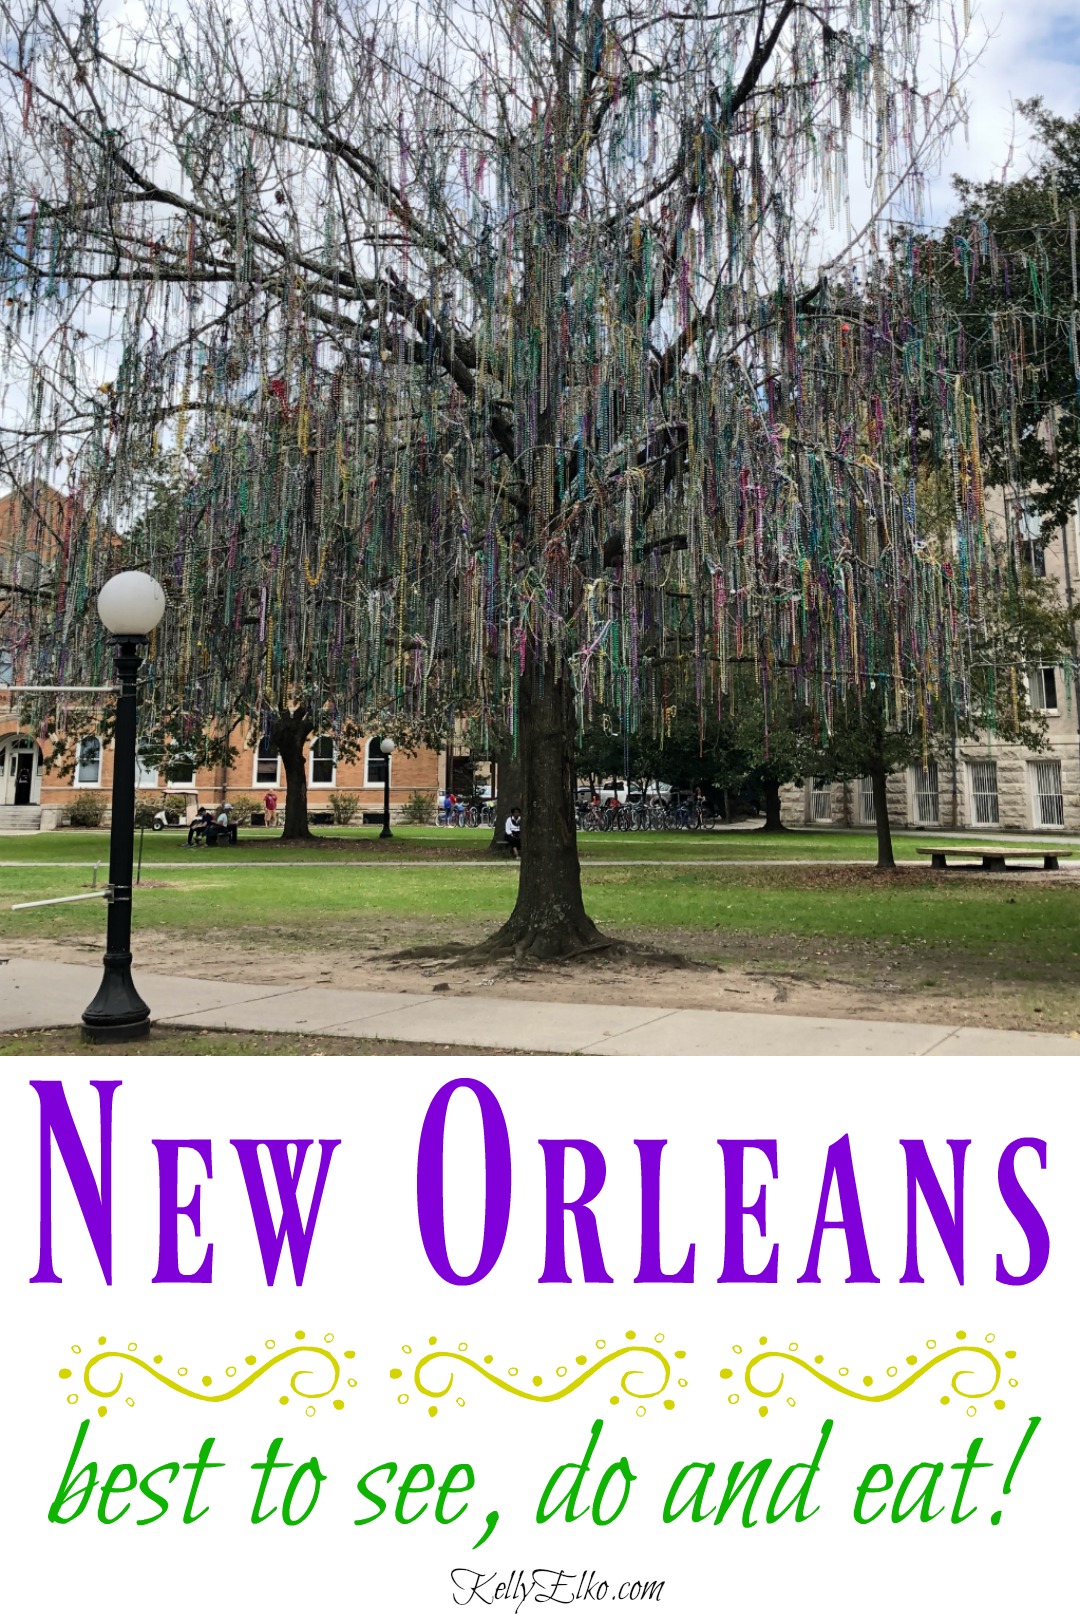 Best of New Orleans - what to see, do and eat. Love these tips that get you off the beaten path kellyelko.com #neworleans #nola #travel #vacation 